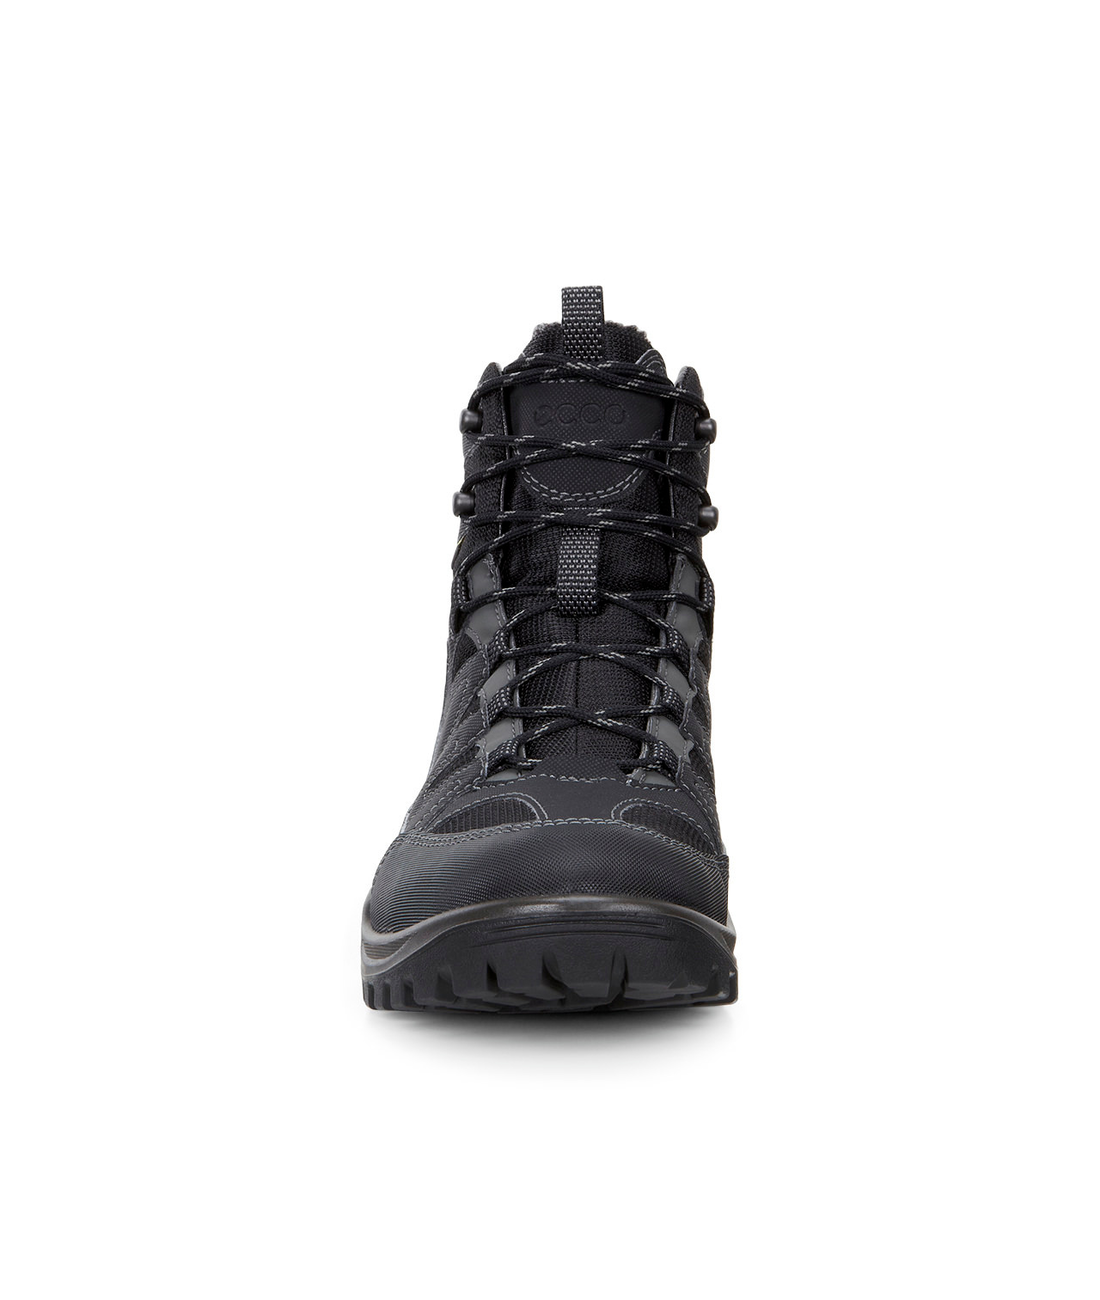 Xpedition III M High GTX Winter